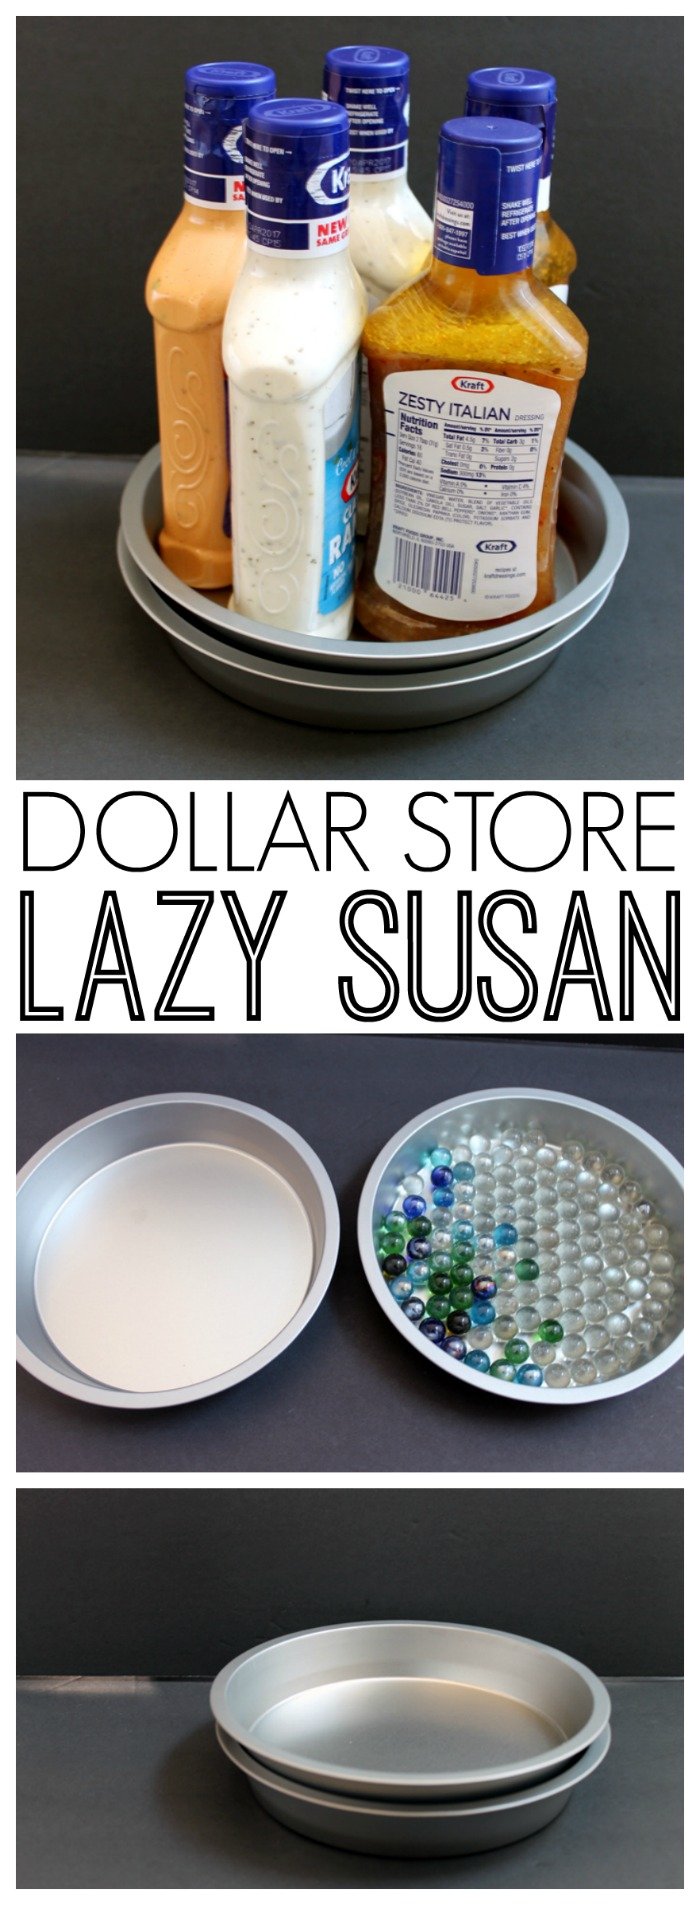 Dollar store lazy susan organizing idea - an inexpensive way to organize your kitchen cabinets!